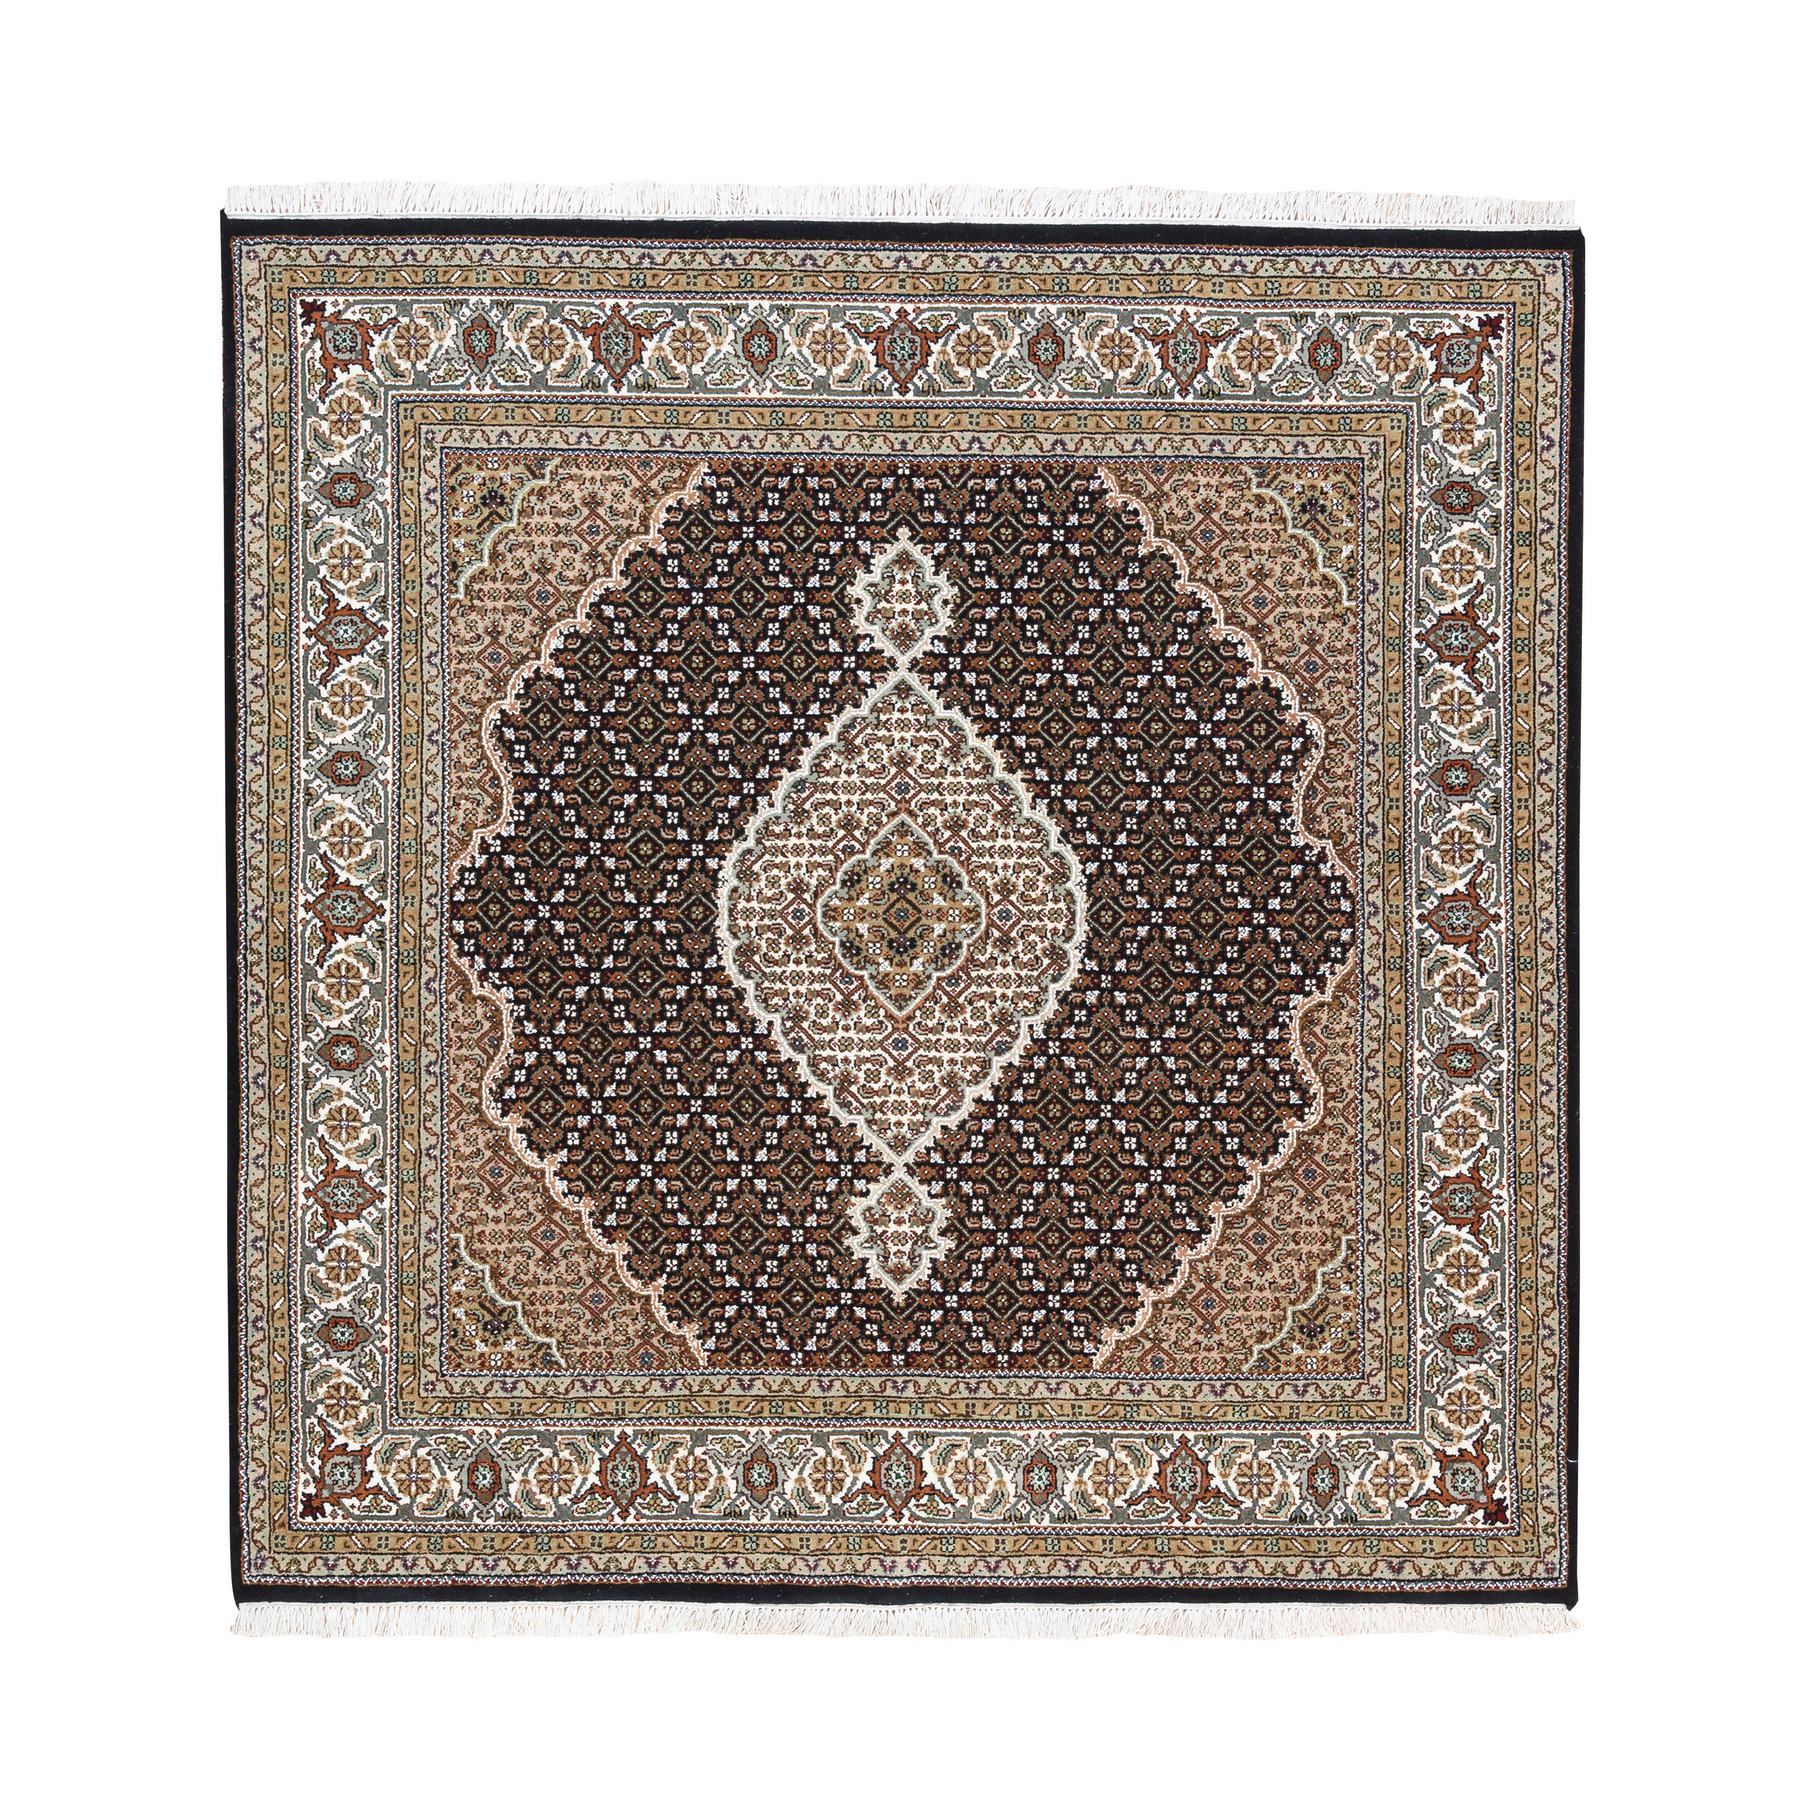 Pirniakan Collection Hand Knotted Black Rug No: 1125100